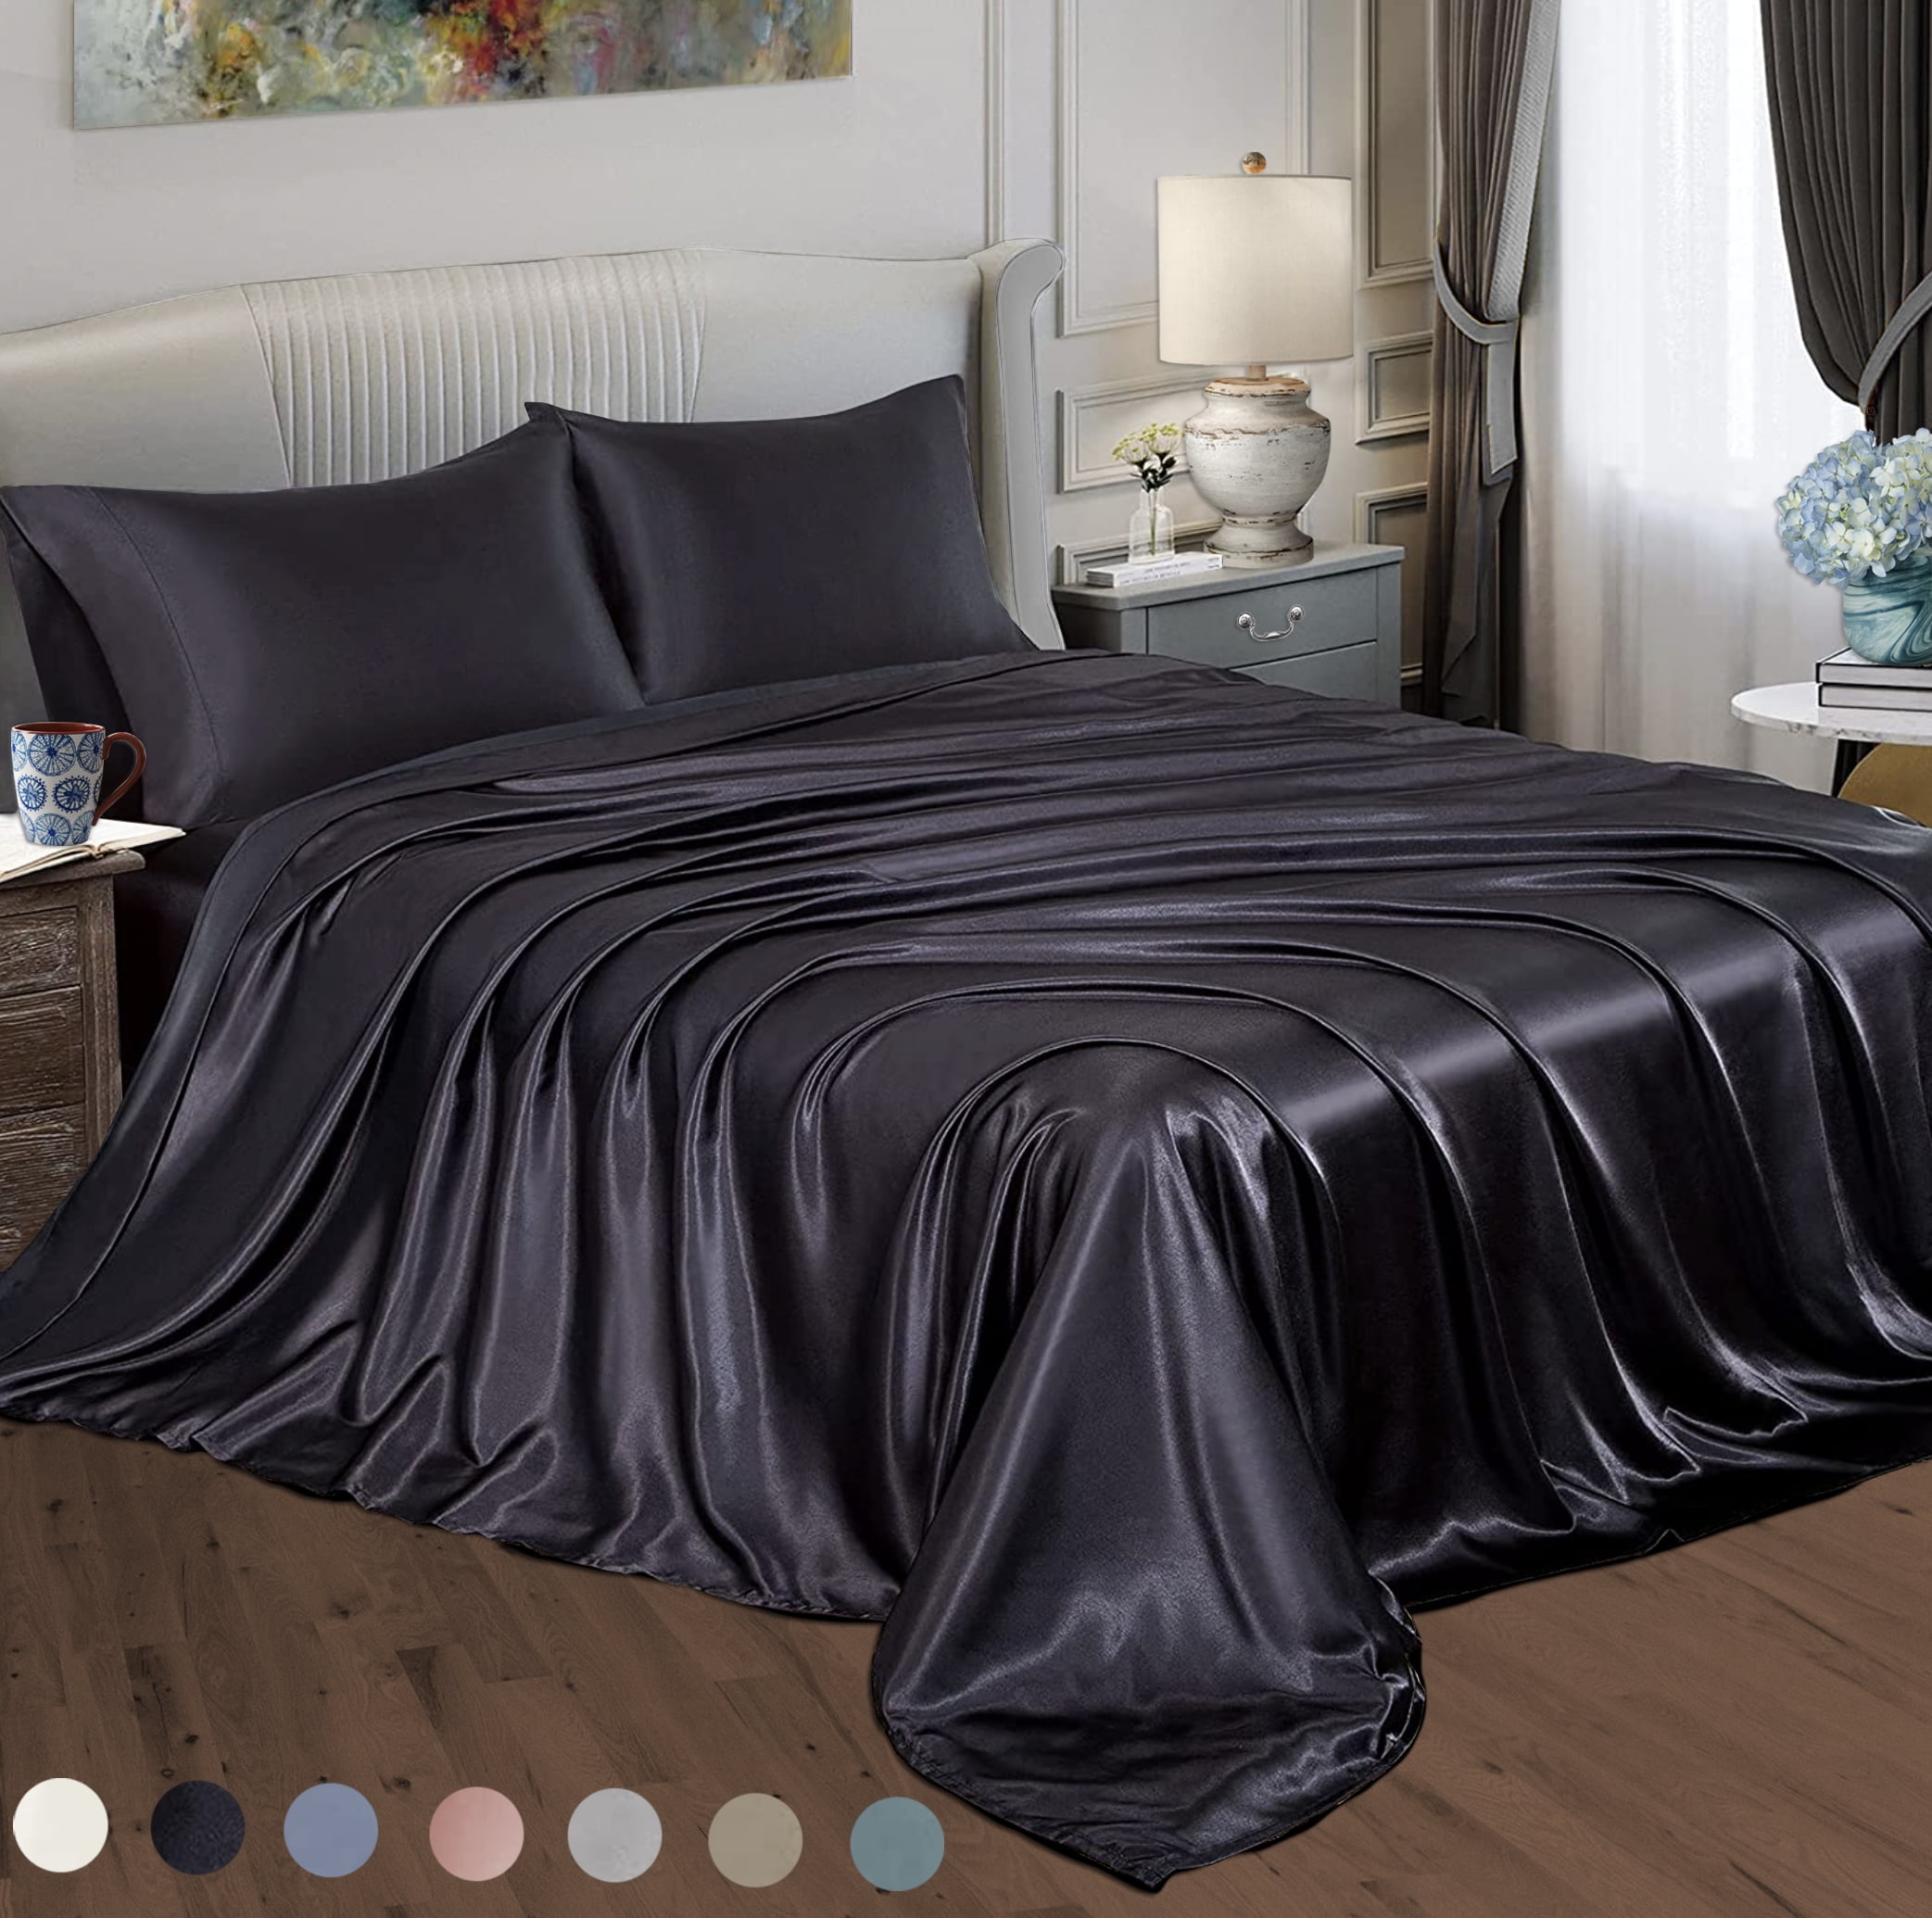 Solid Color Satin Silk Sheet Sets Of Flat Sheet and Fitted Sheet and Pillowcase